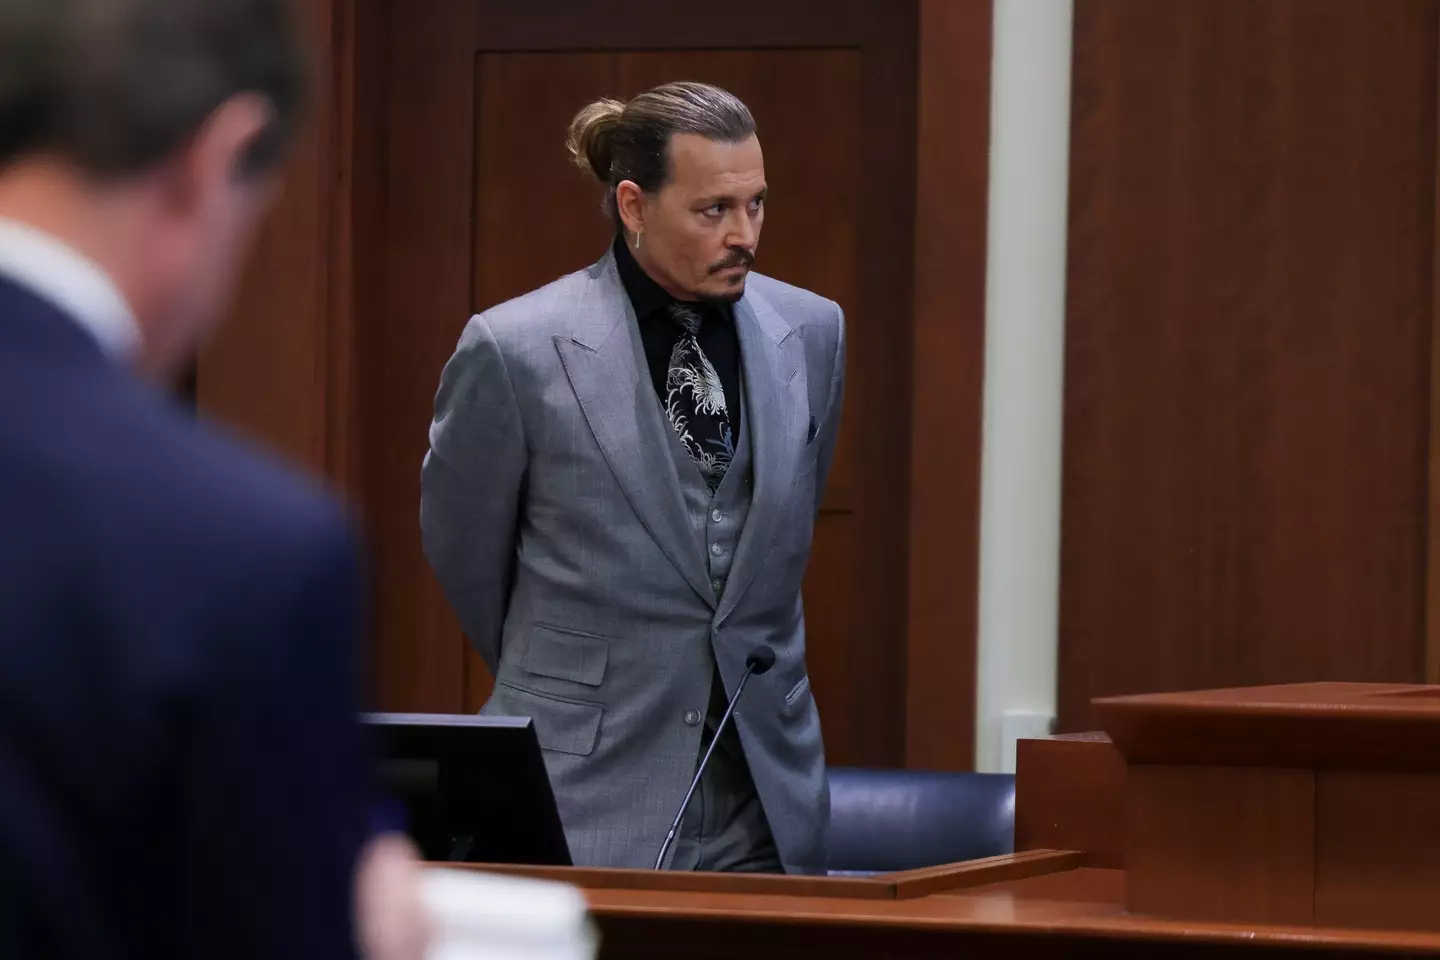 The jury is preparing to continue deliberations in Depp's trial.